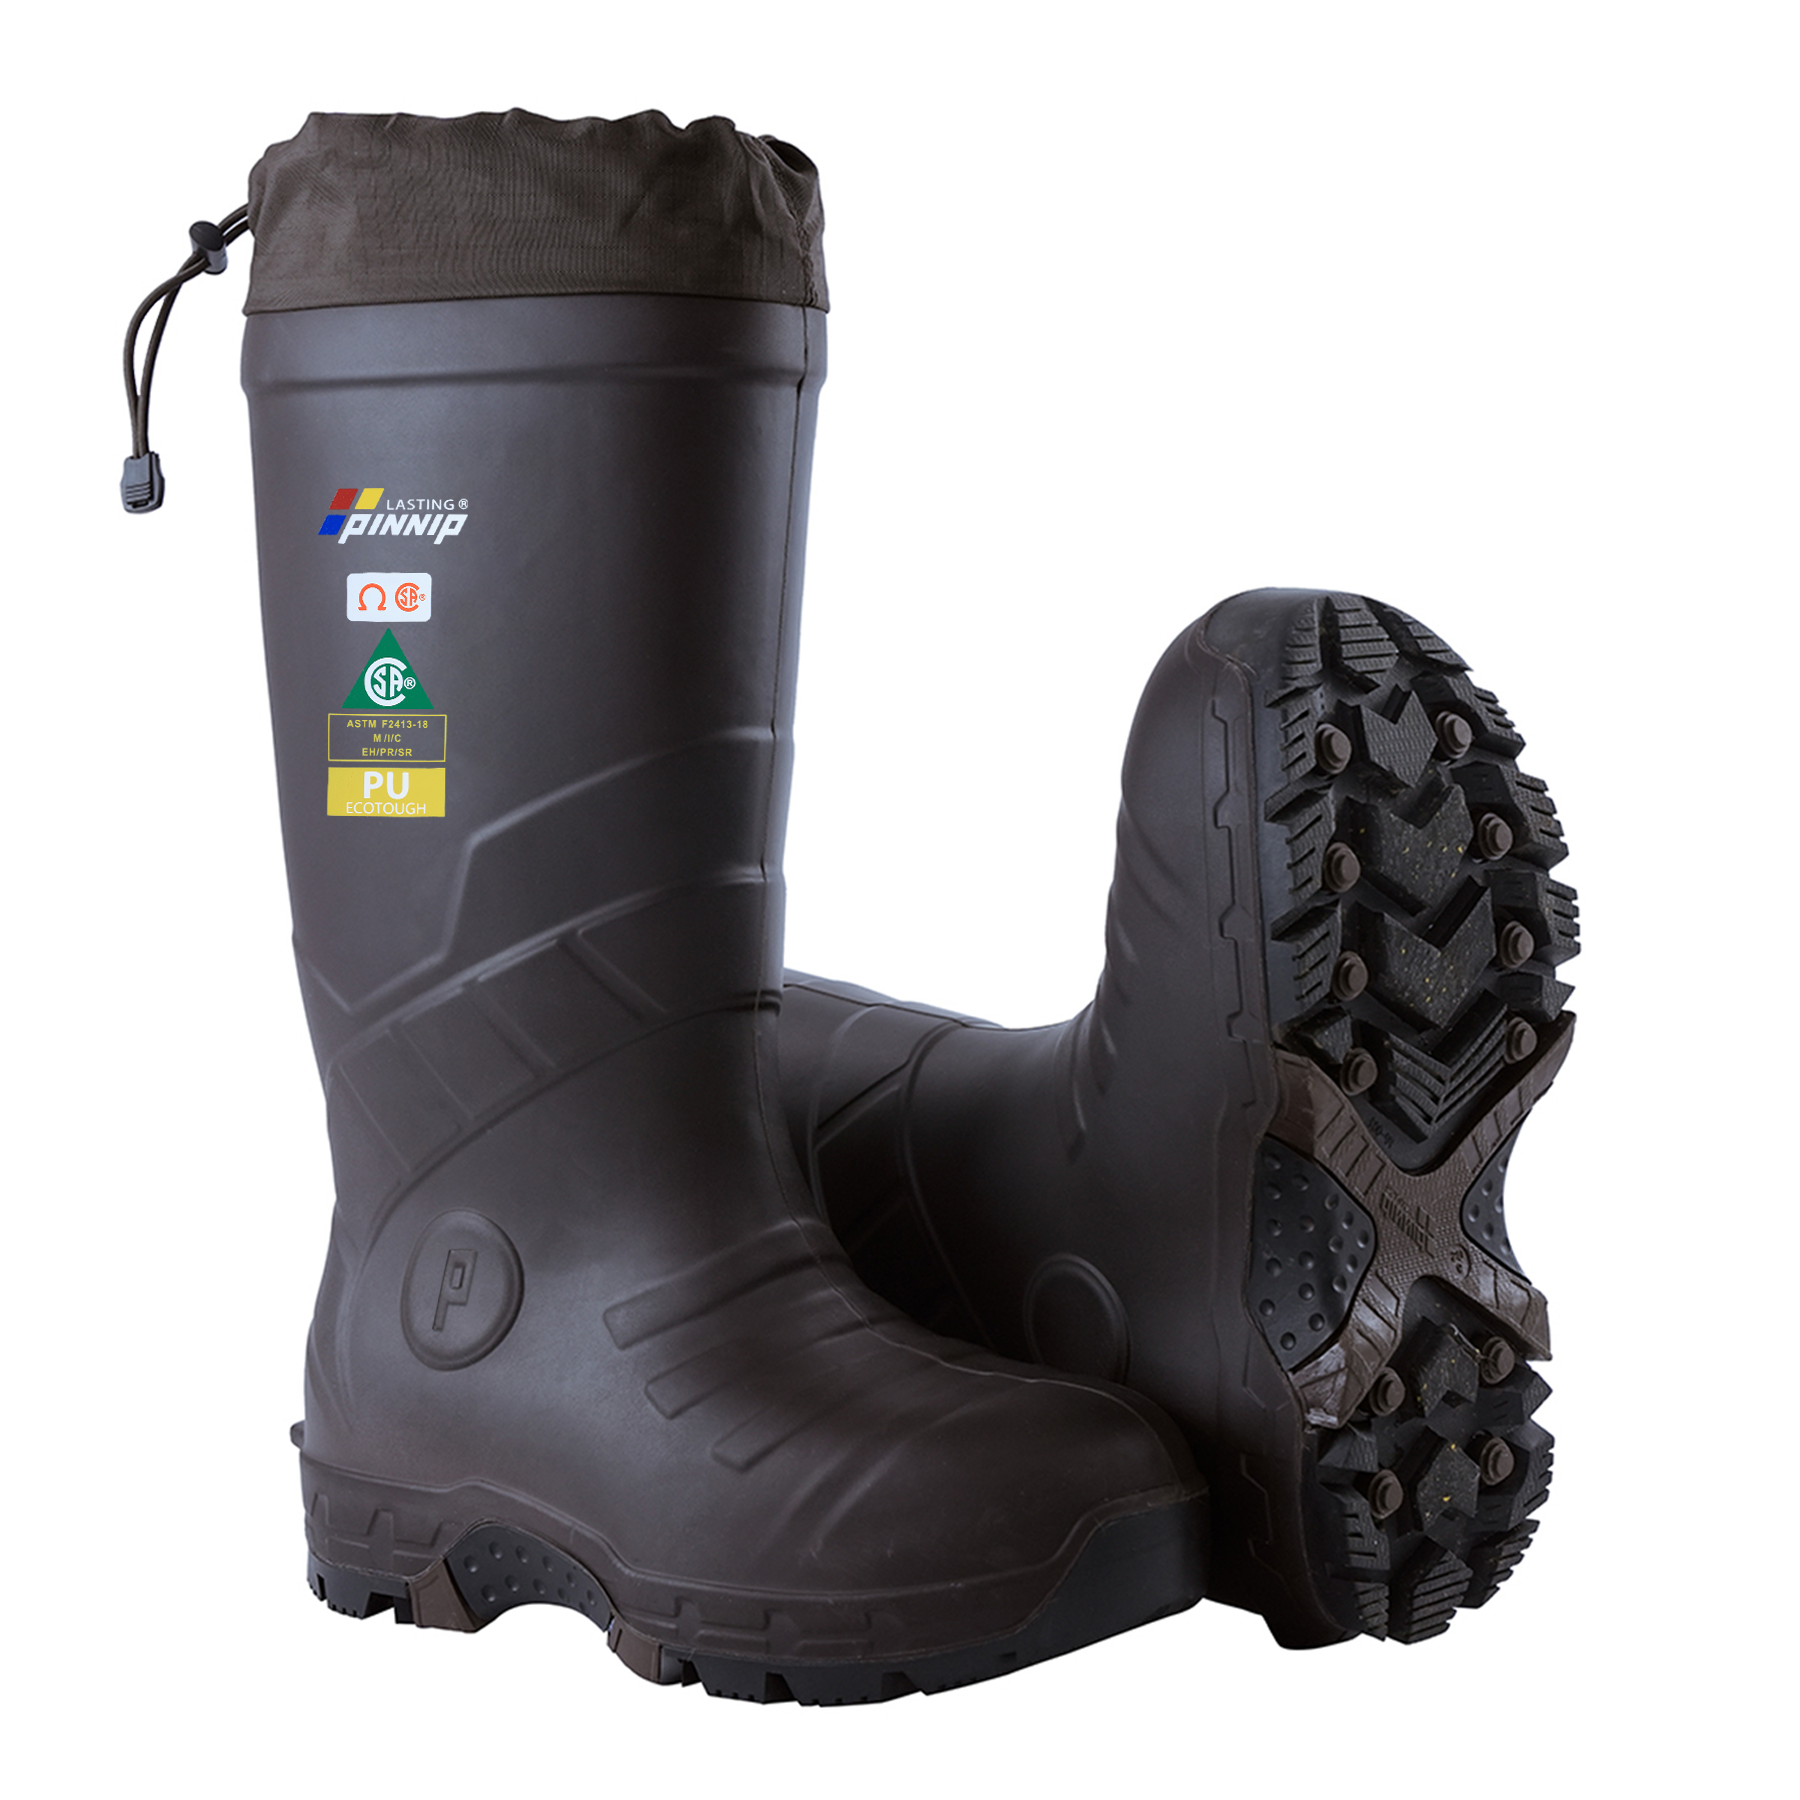 Safety boots, winter work boots, steel toe boots-Brown